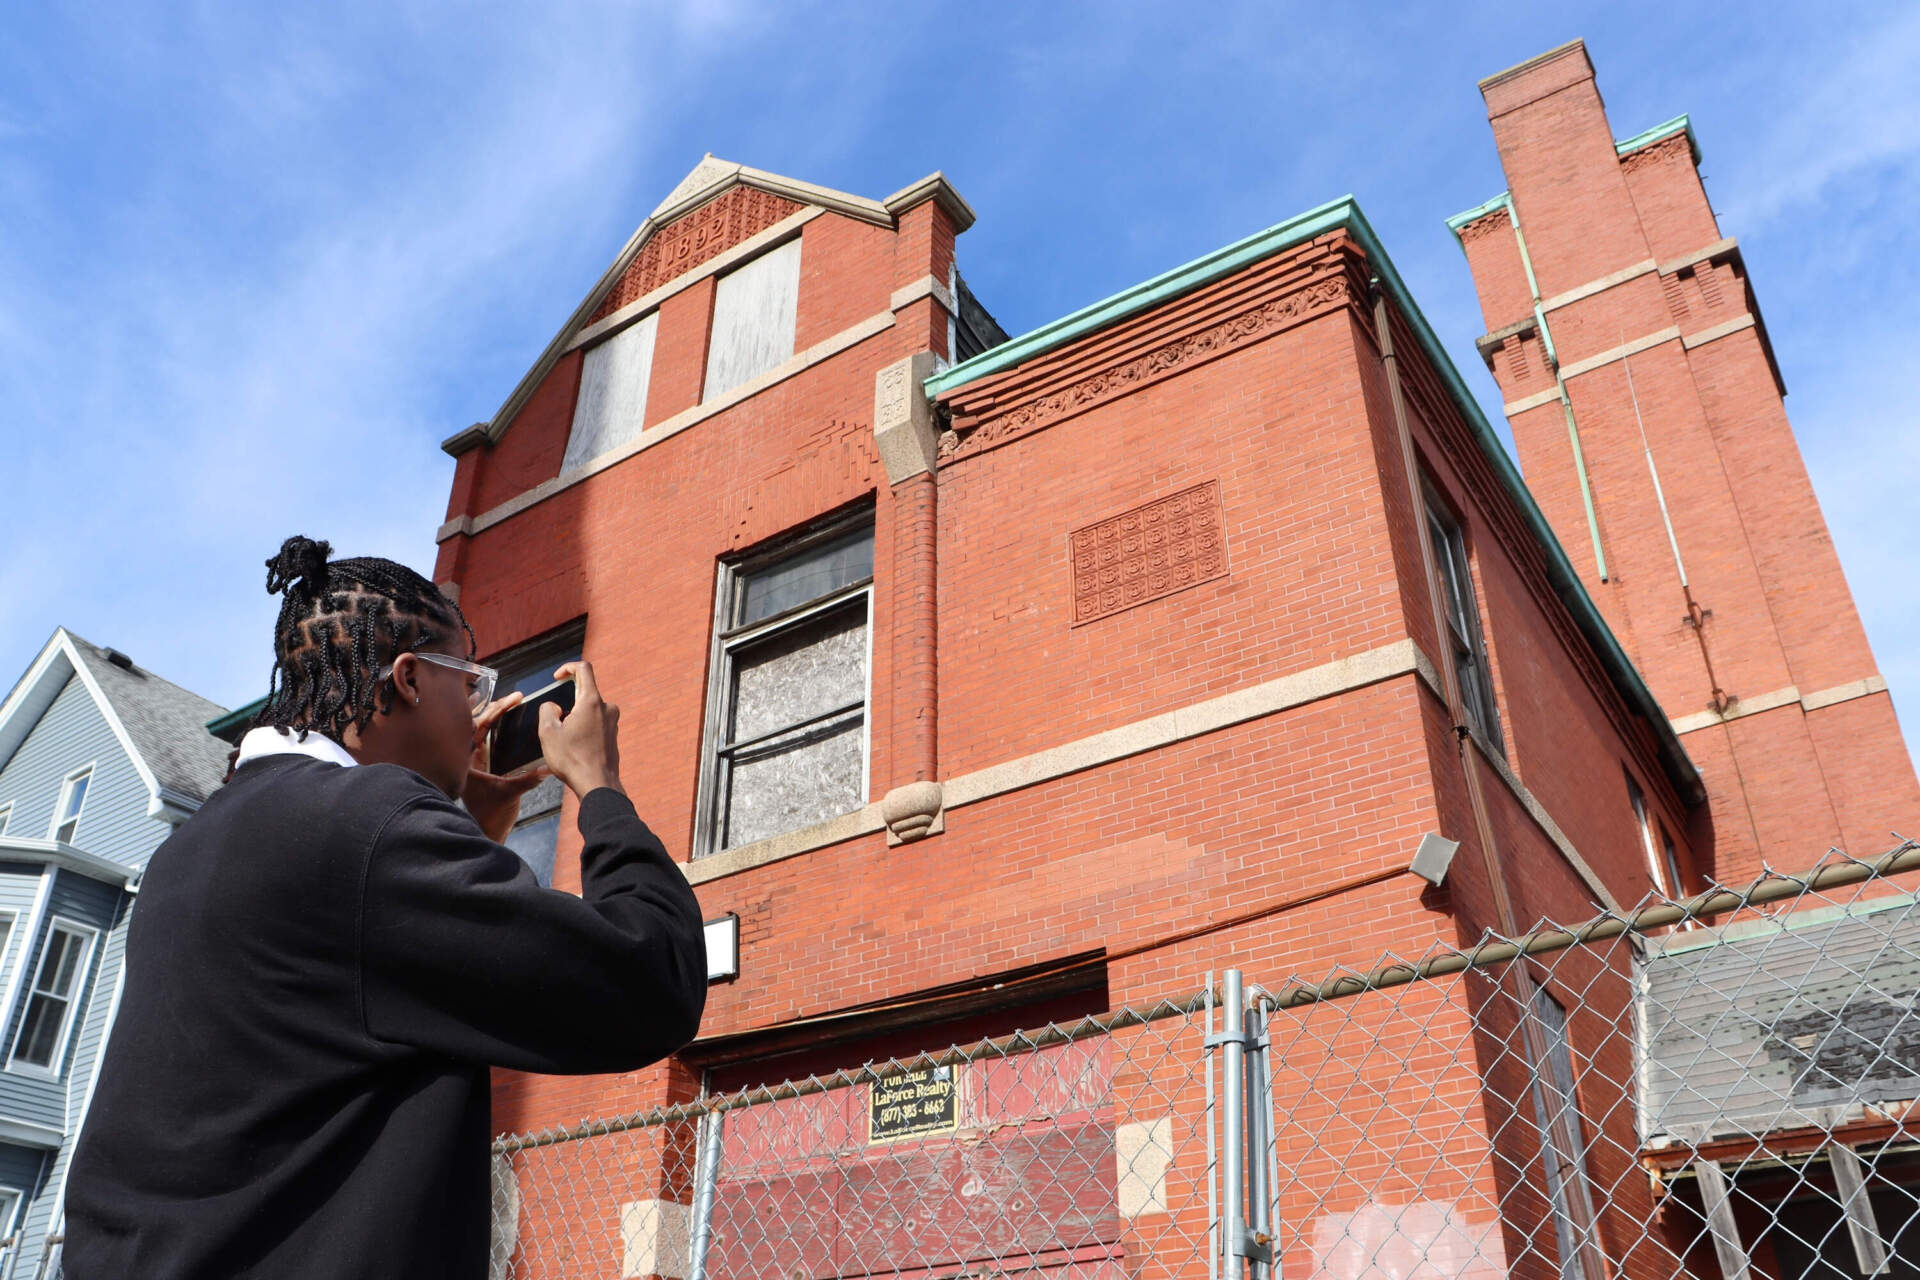 Jai Edward Blyden takes photos and videos of the Hillman Street Firehouse in New Bedford. Blyden is one of the architecture students who traveled 450 miles from Howard University in Washington D.C. to New Bedford to explore how they could breathe new life into the Hillman Street Firehouse. (Eve Zuckoff/CAI)